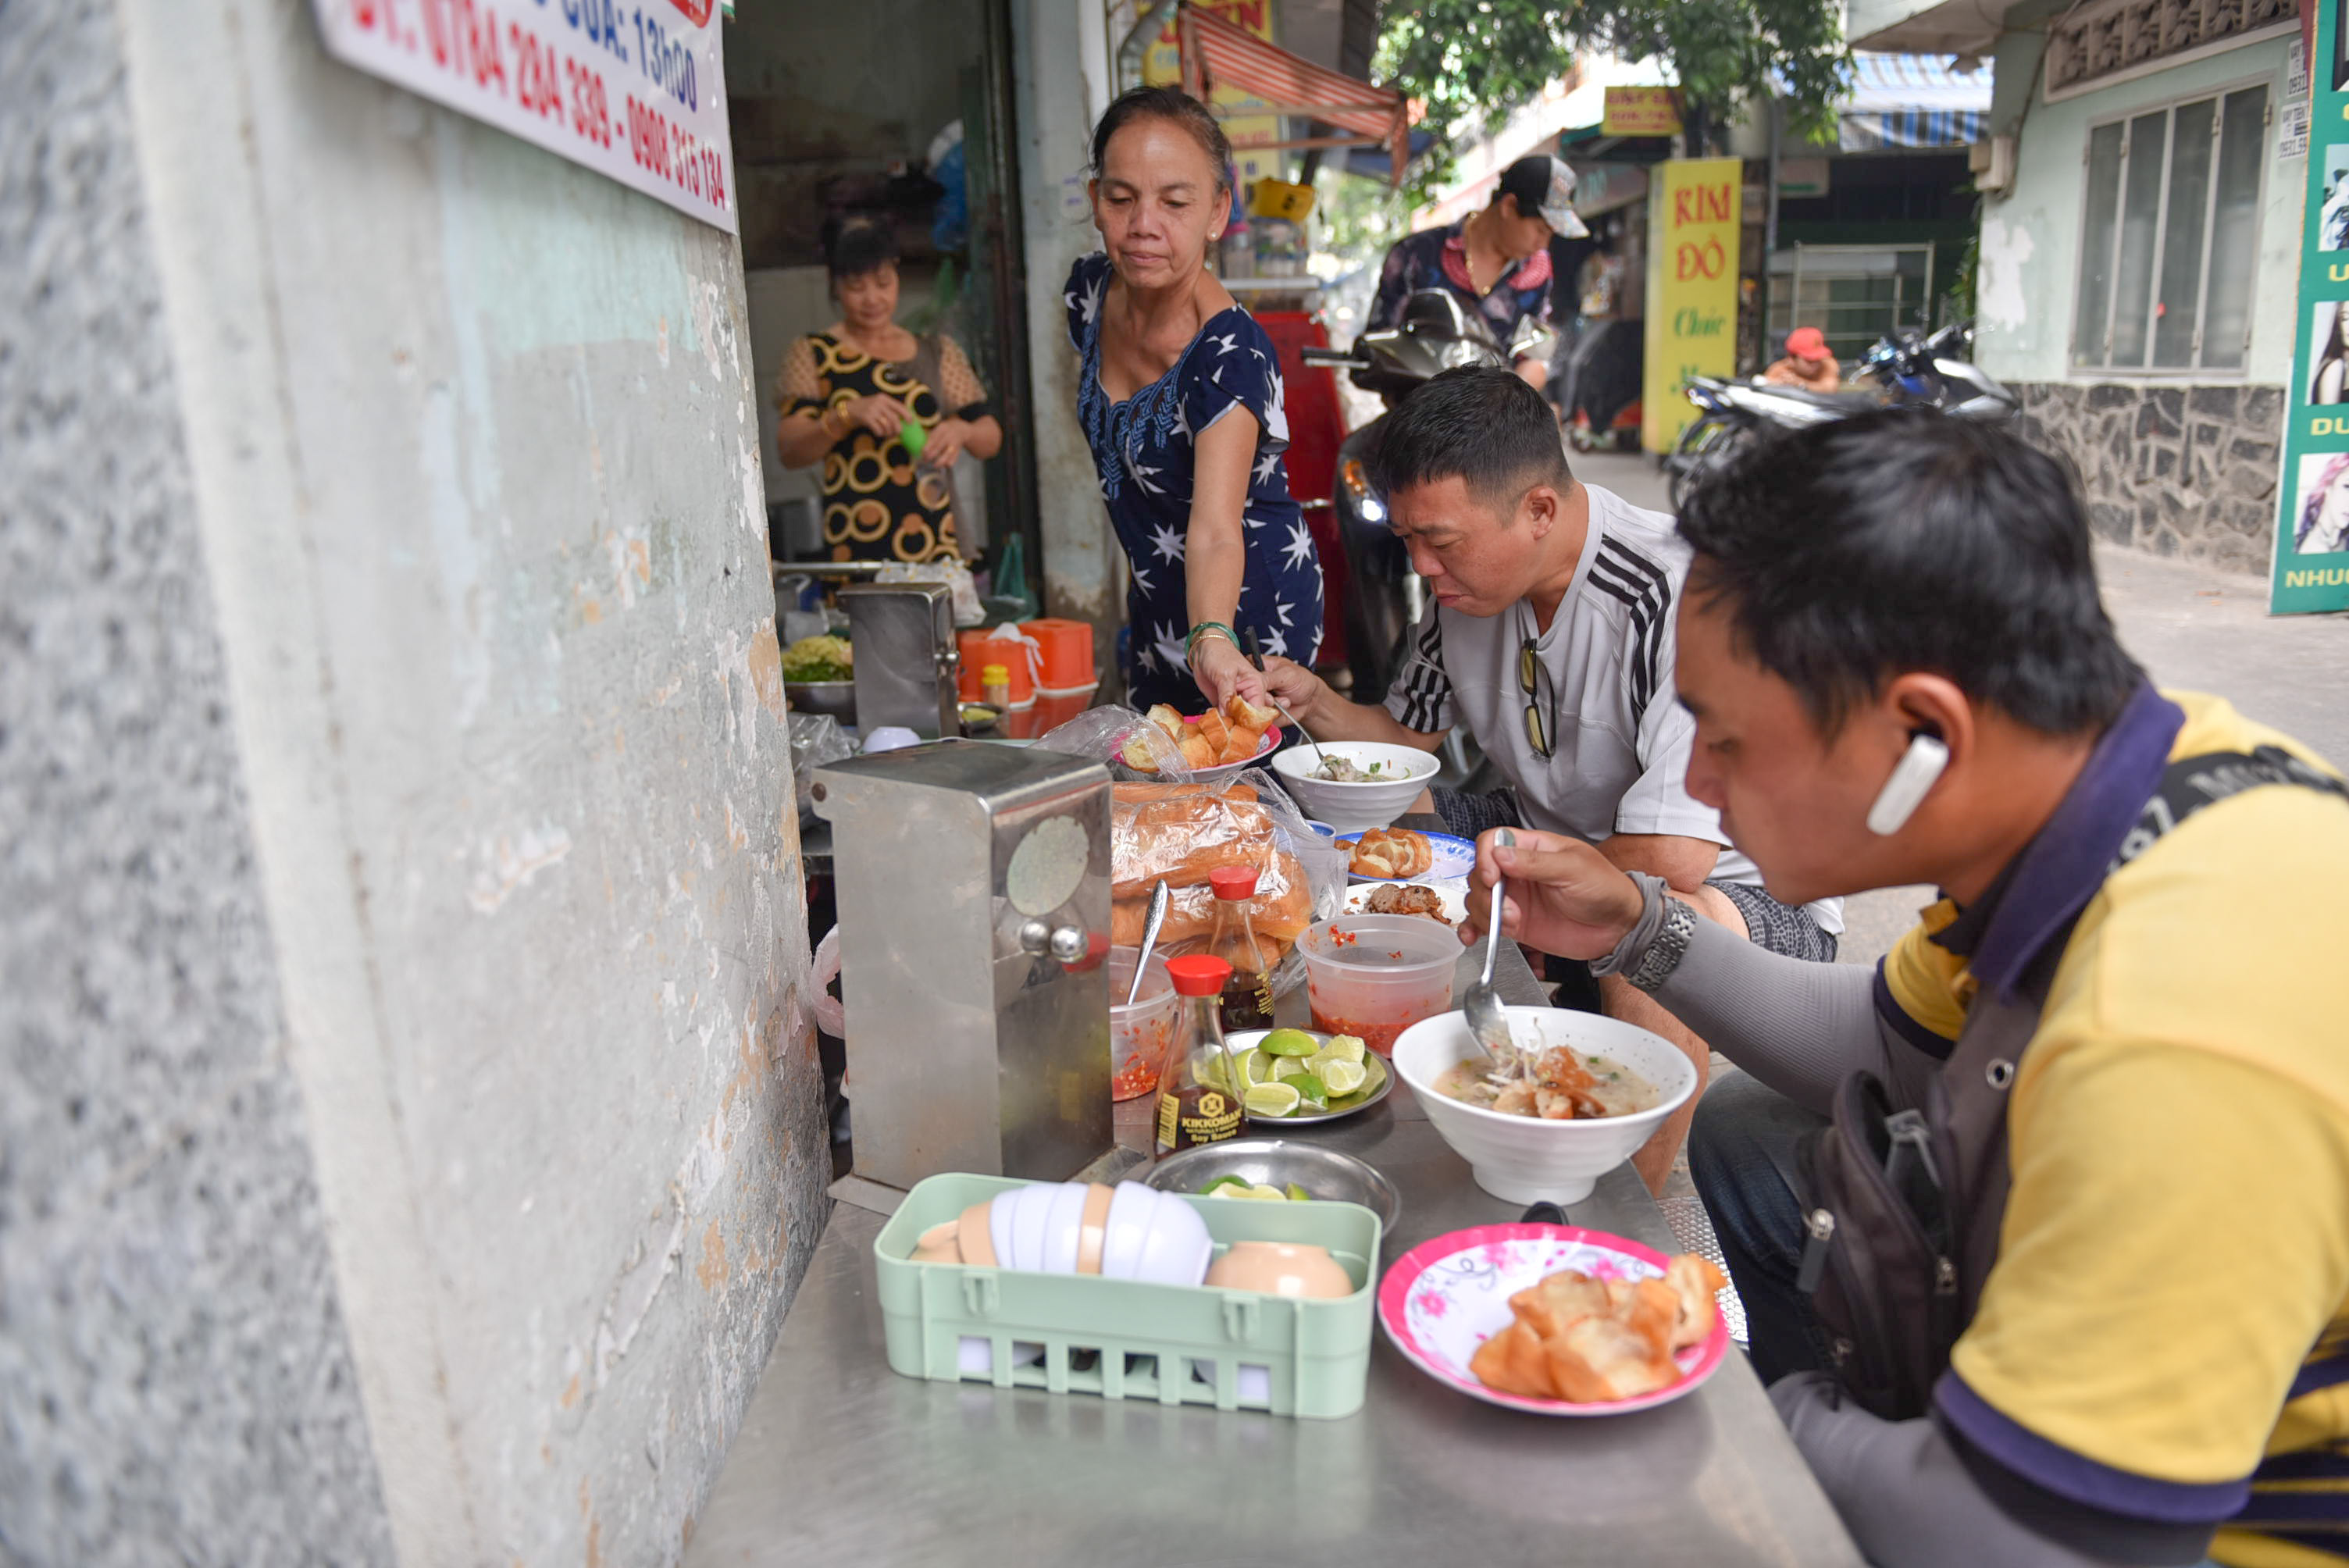 Diners enjoy their meals at Co Hoang in District 11, Ho Chi Minh City. Photo: Ngoc Phuong / Tuoi Tre News